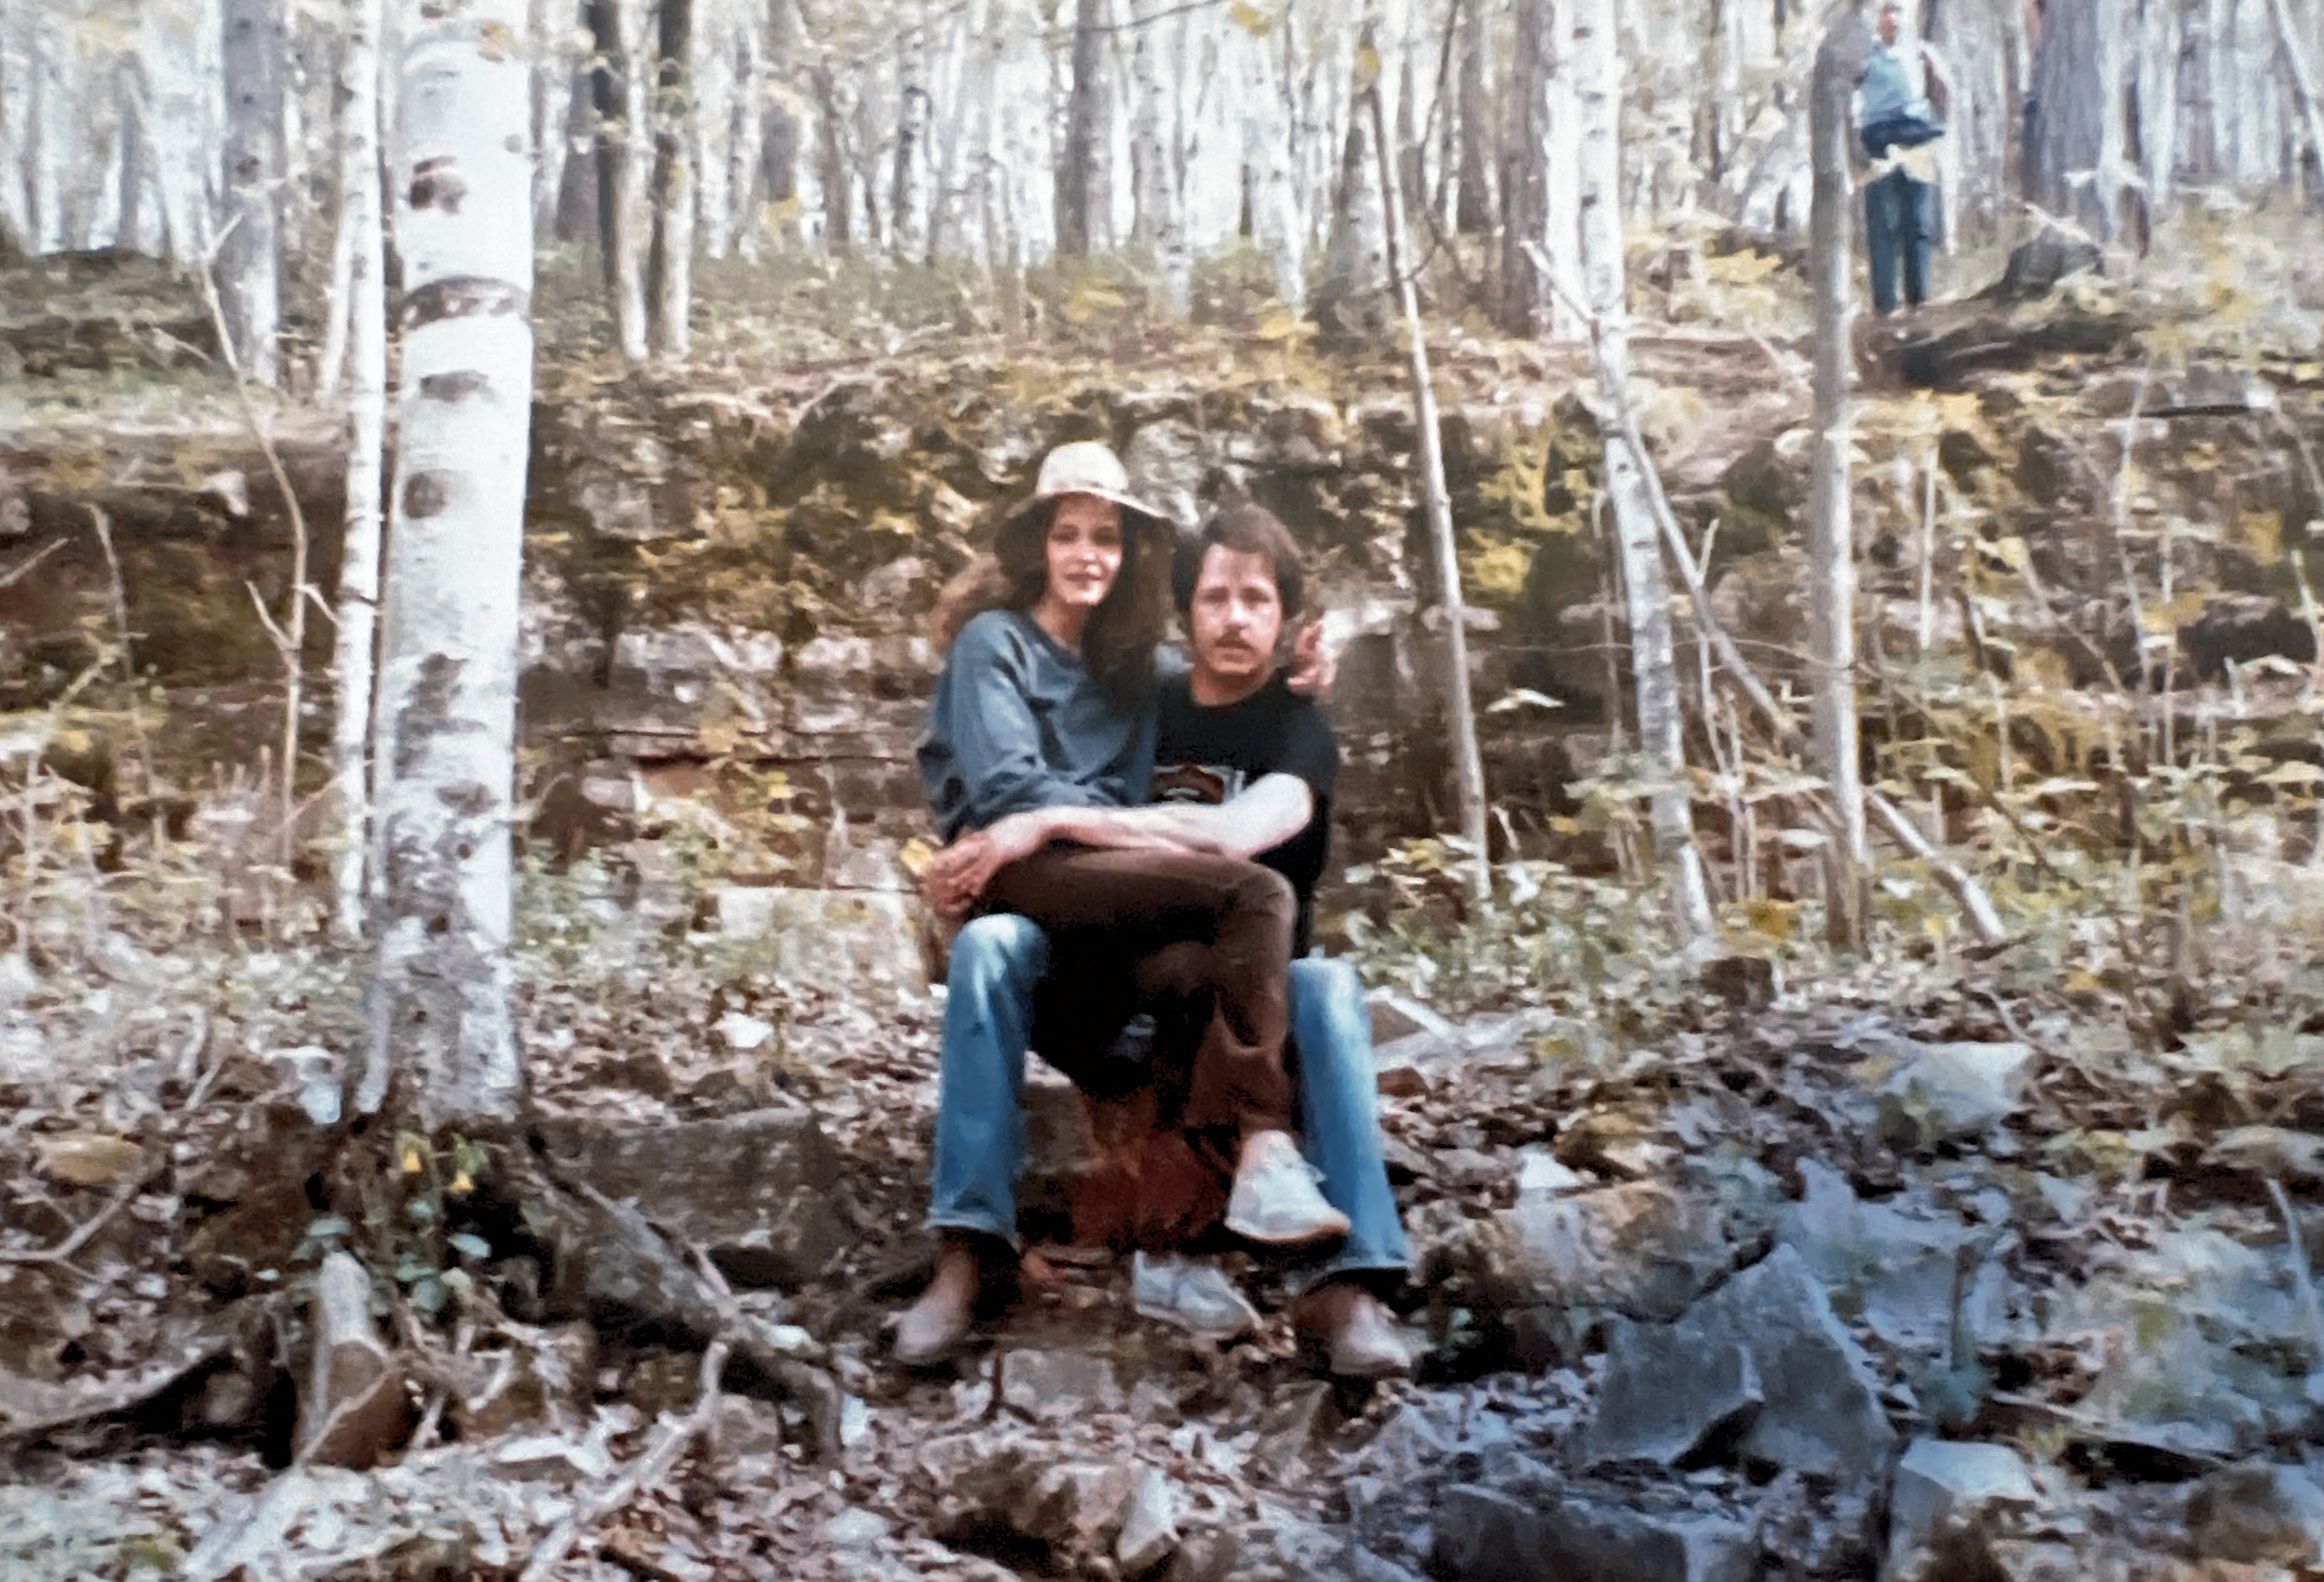 Sue Sheehan , Steve Sheehan and Kevin Winters Potowatami State park 1984?